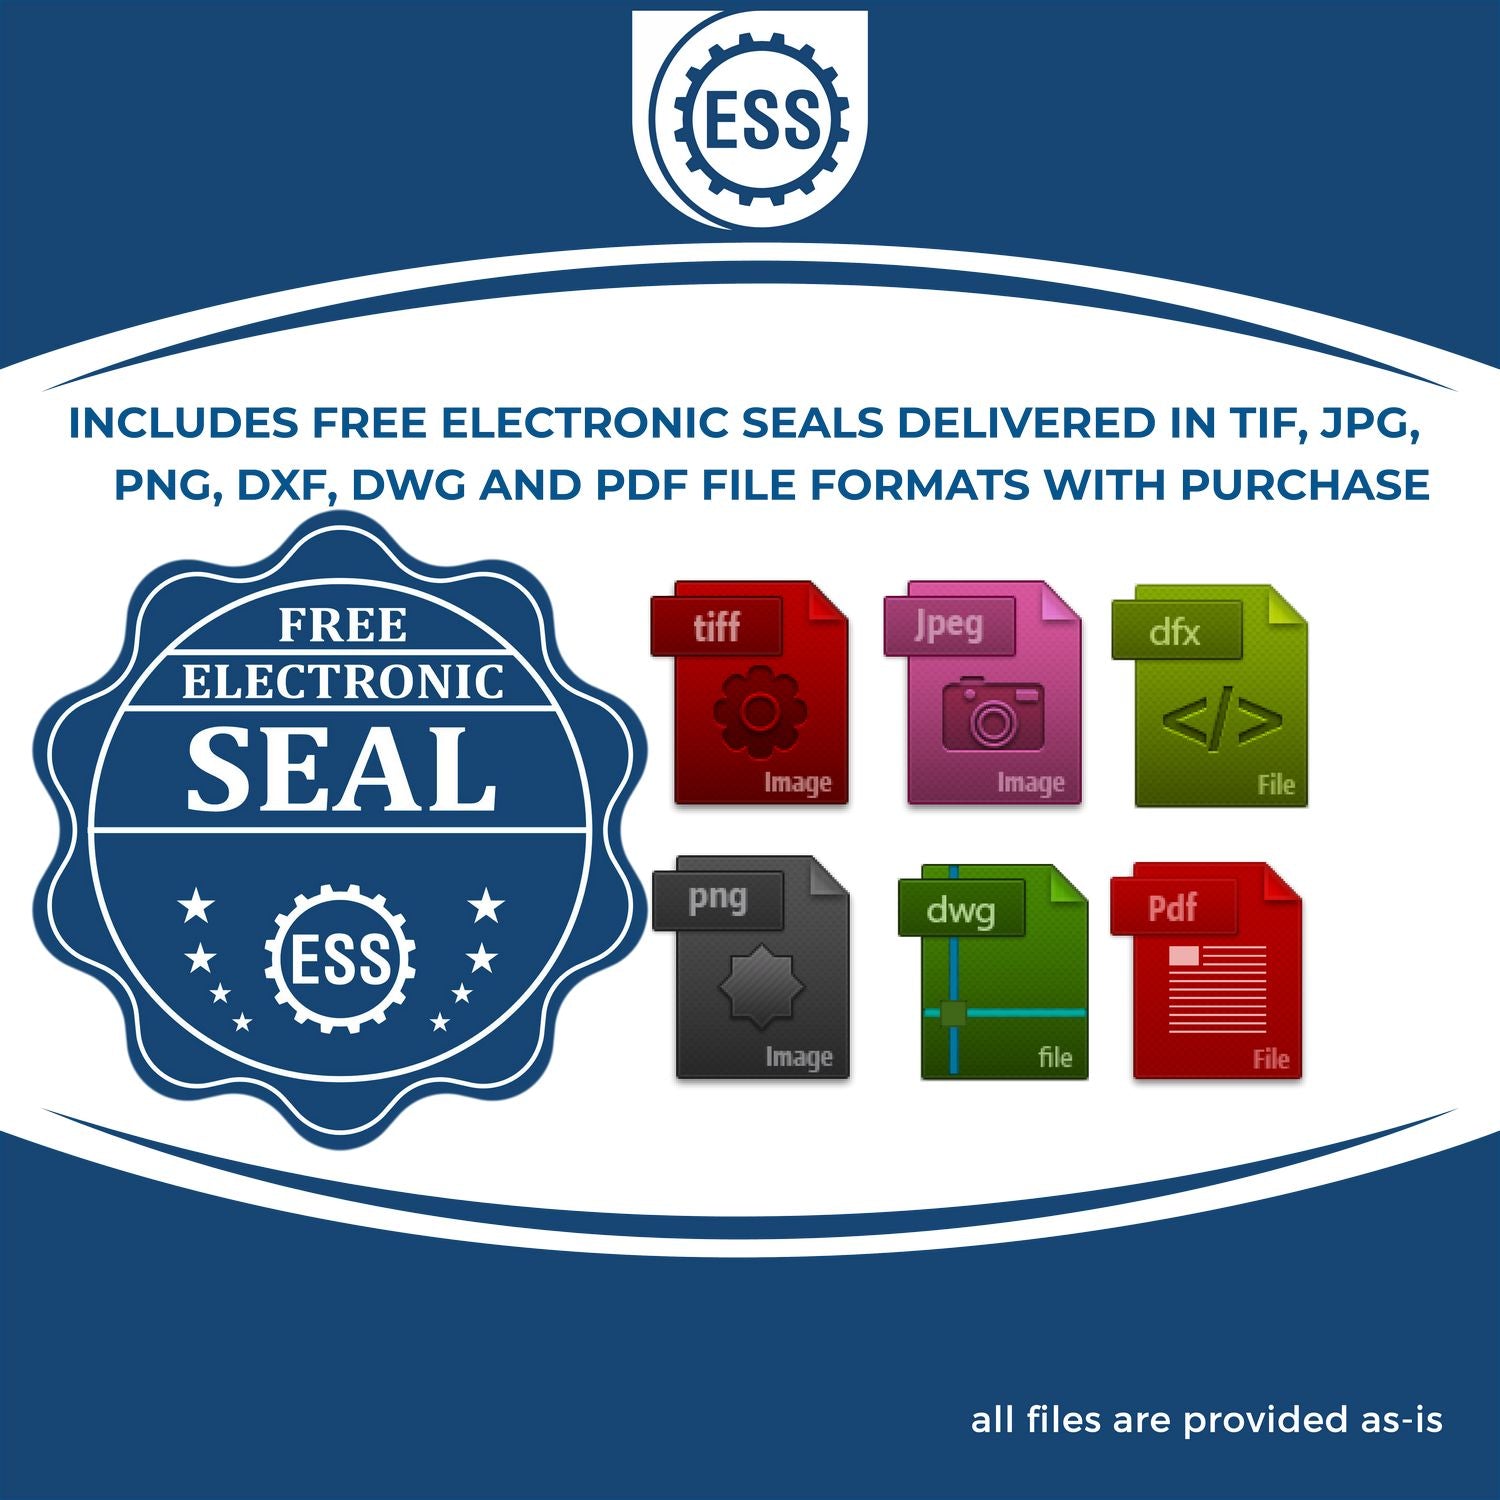 An infographic for the free electronic seal for the Iowa Engineer Desk Seal illustrating the different file type icons such as DXF, DWG, TIF, JPG and PNG.